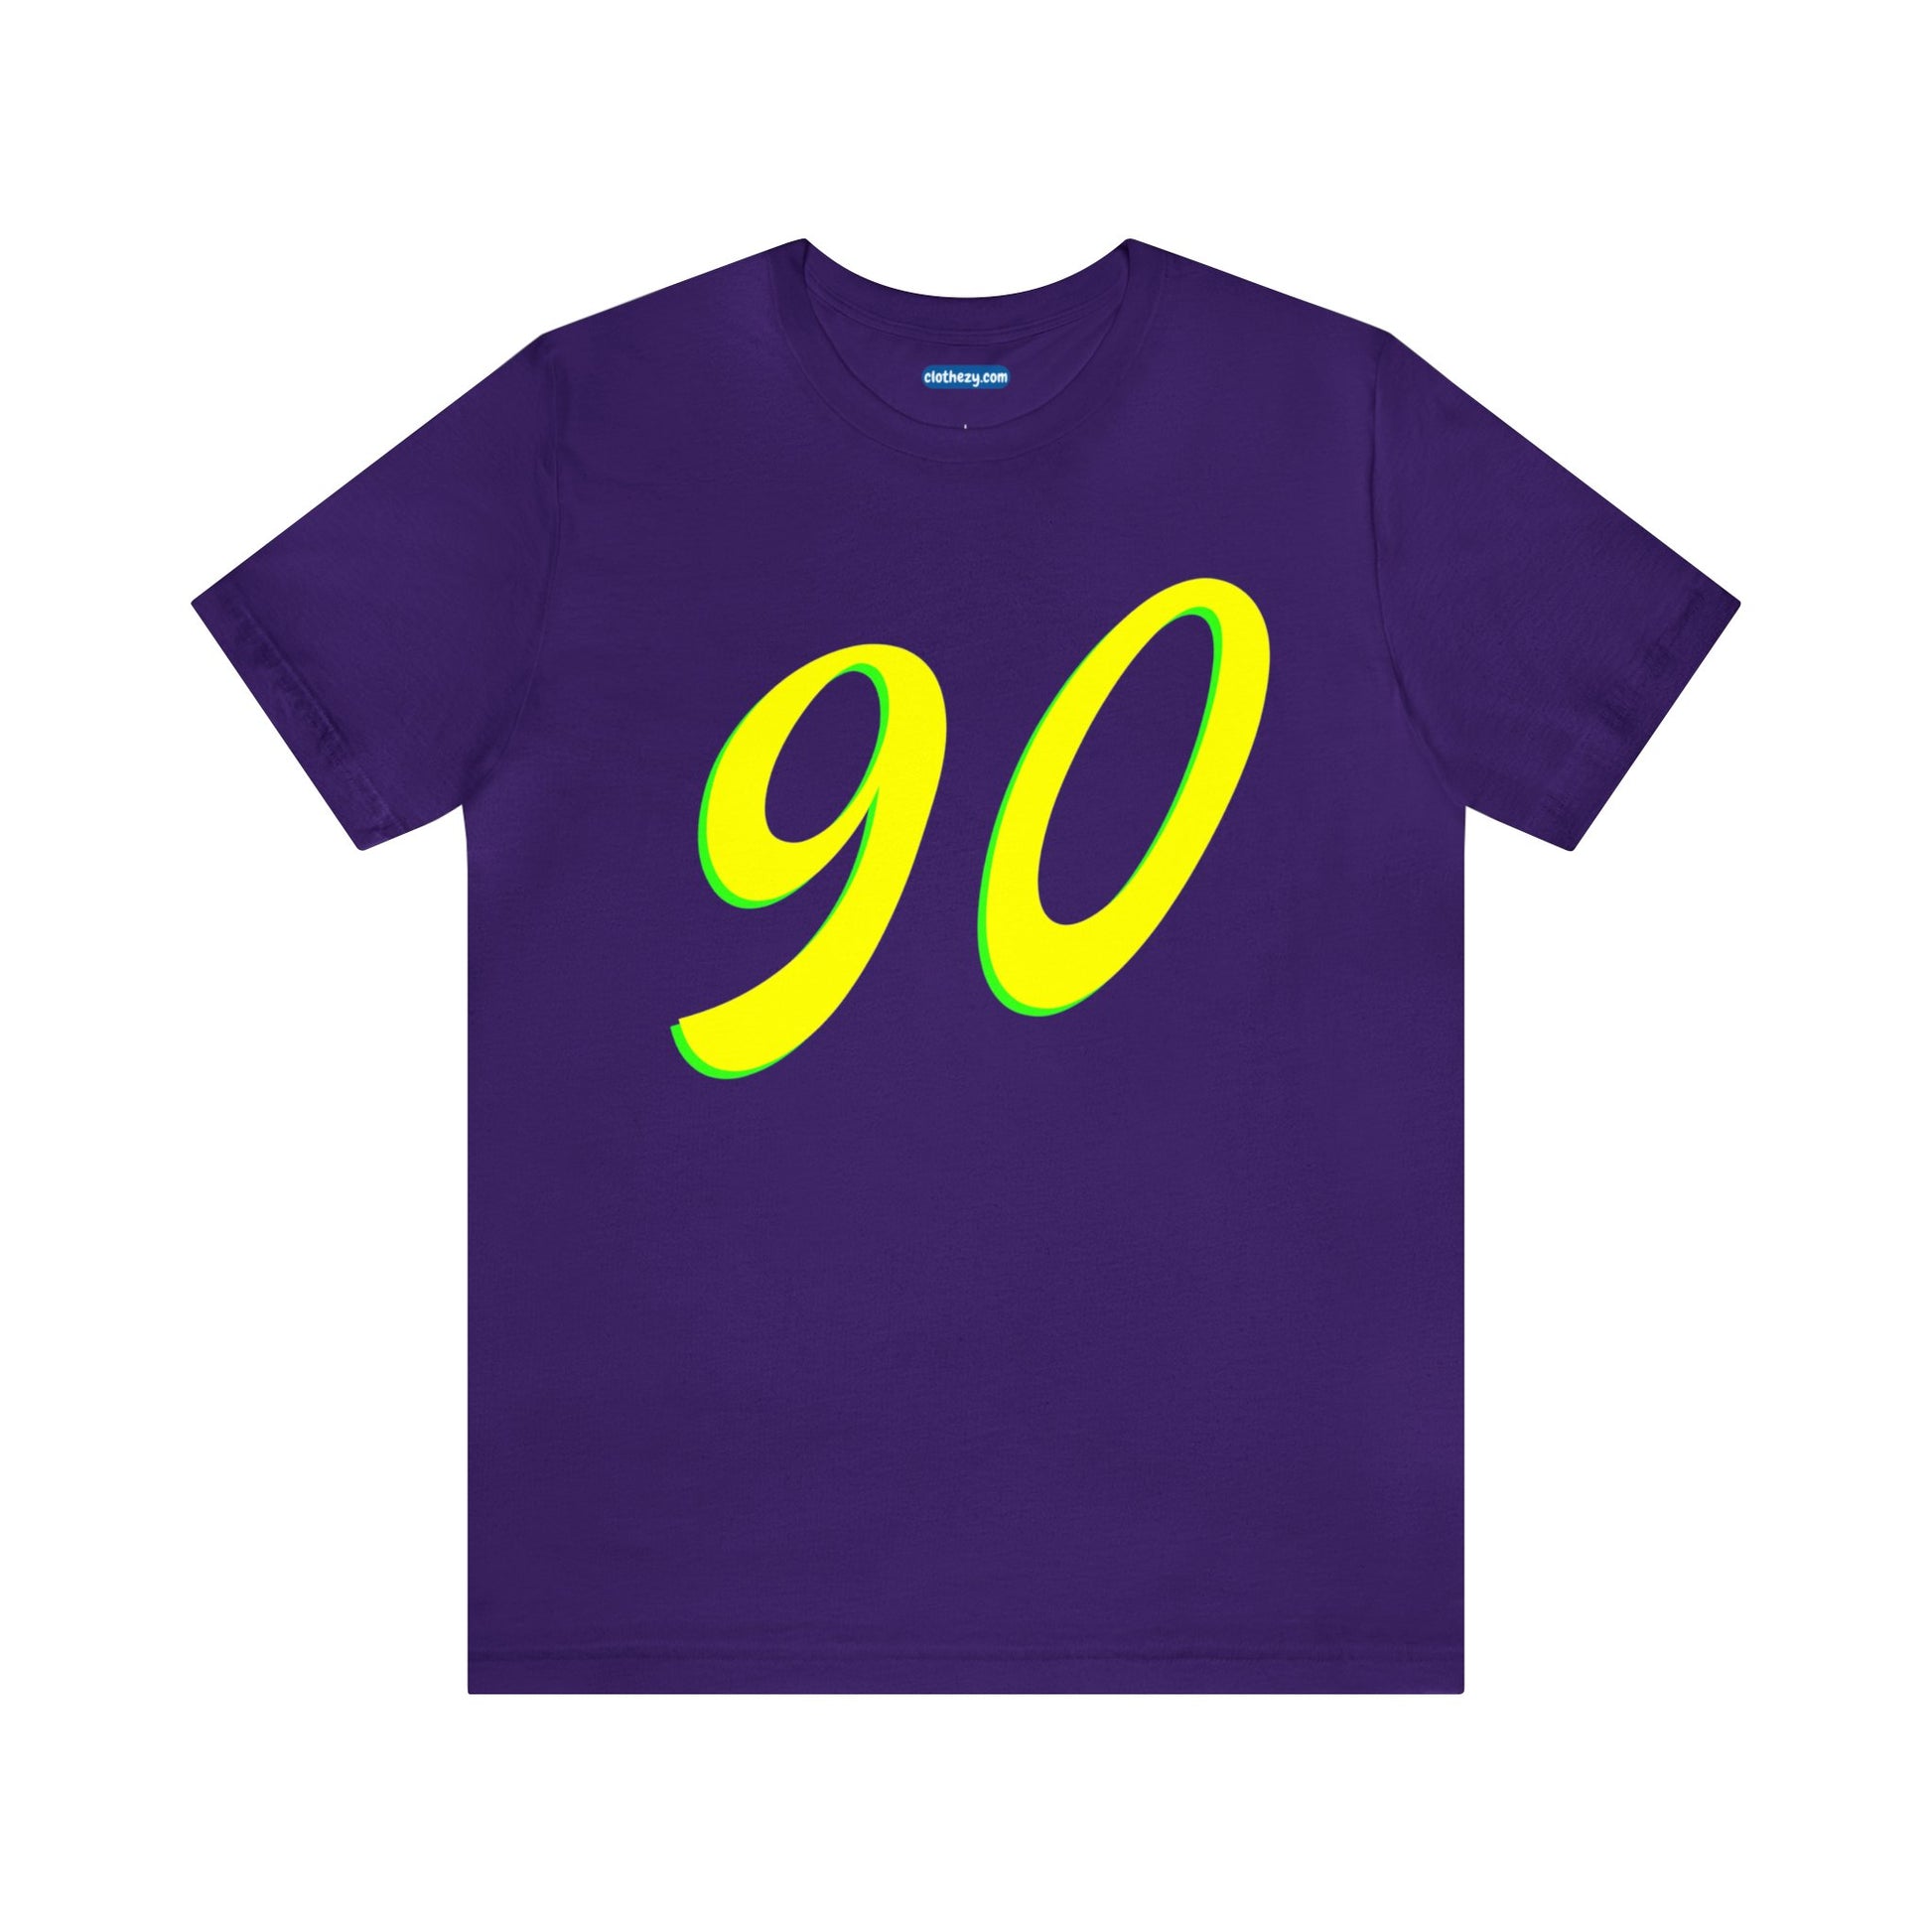 Number 90 Design - Soft Cotton Tee for birthdays and celebrations, Gift for friends and family, Multiple Options by clothezy.com in Purple Size Small - Buy Now